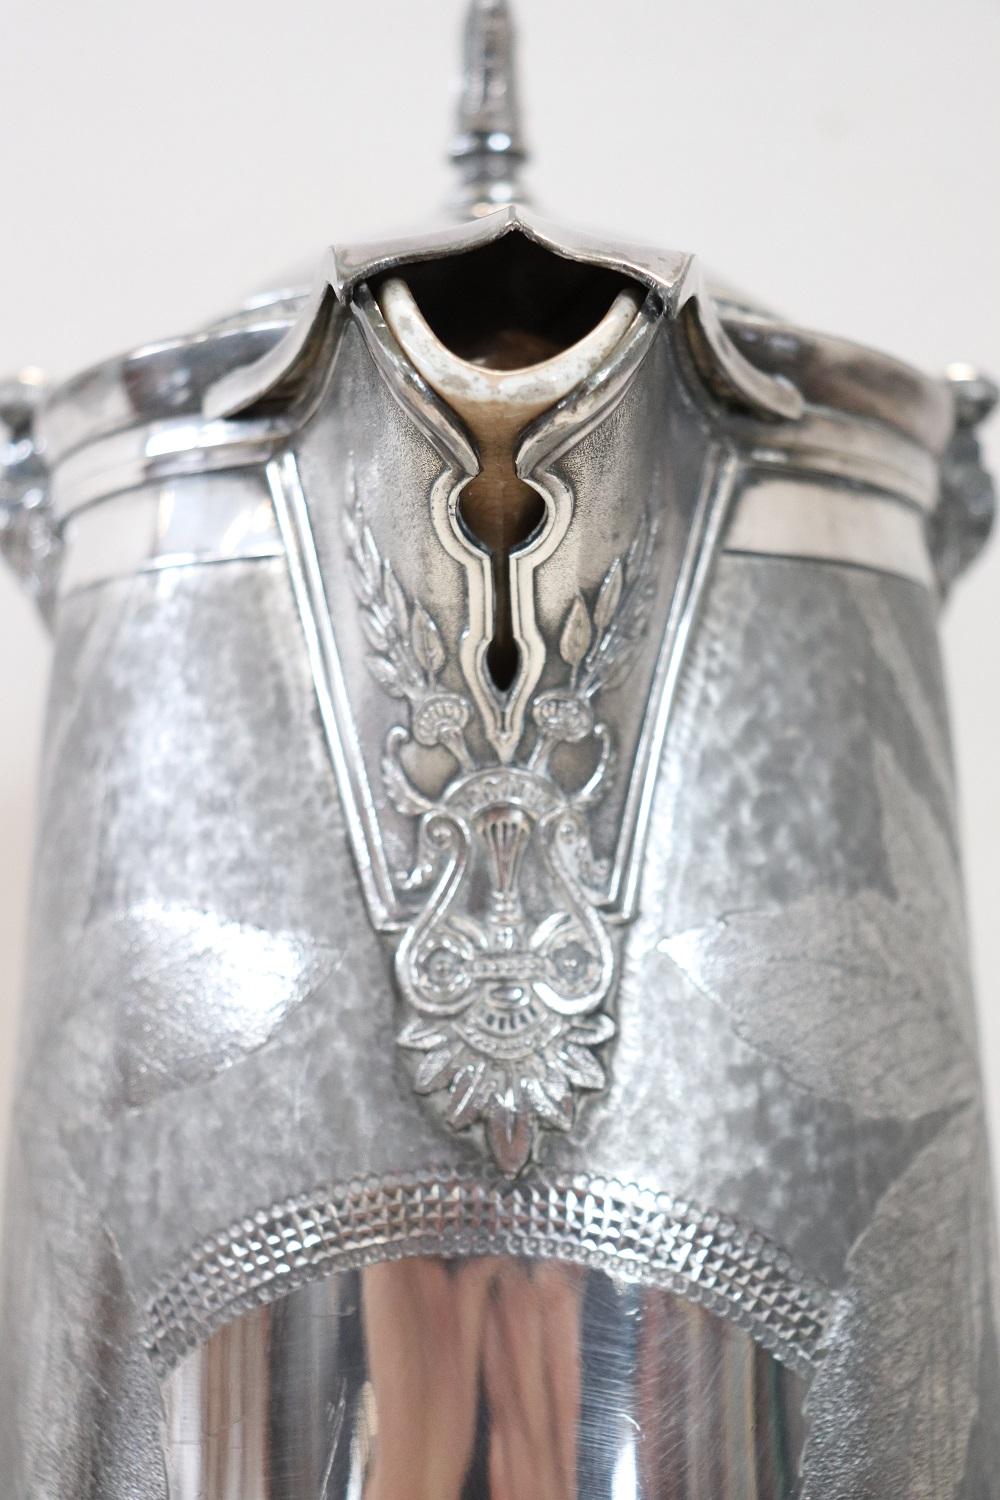 Late 19th Century 19th Century American Antique Silver Plate Pitcher by Reed & Barton For Sale